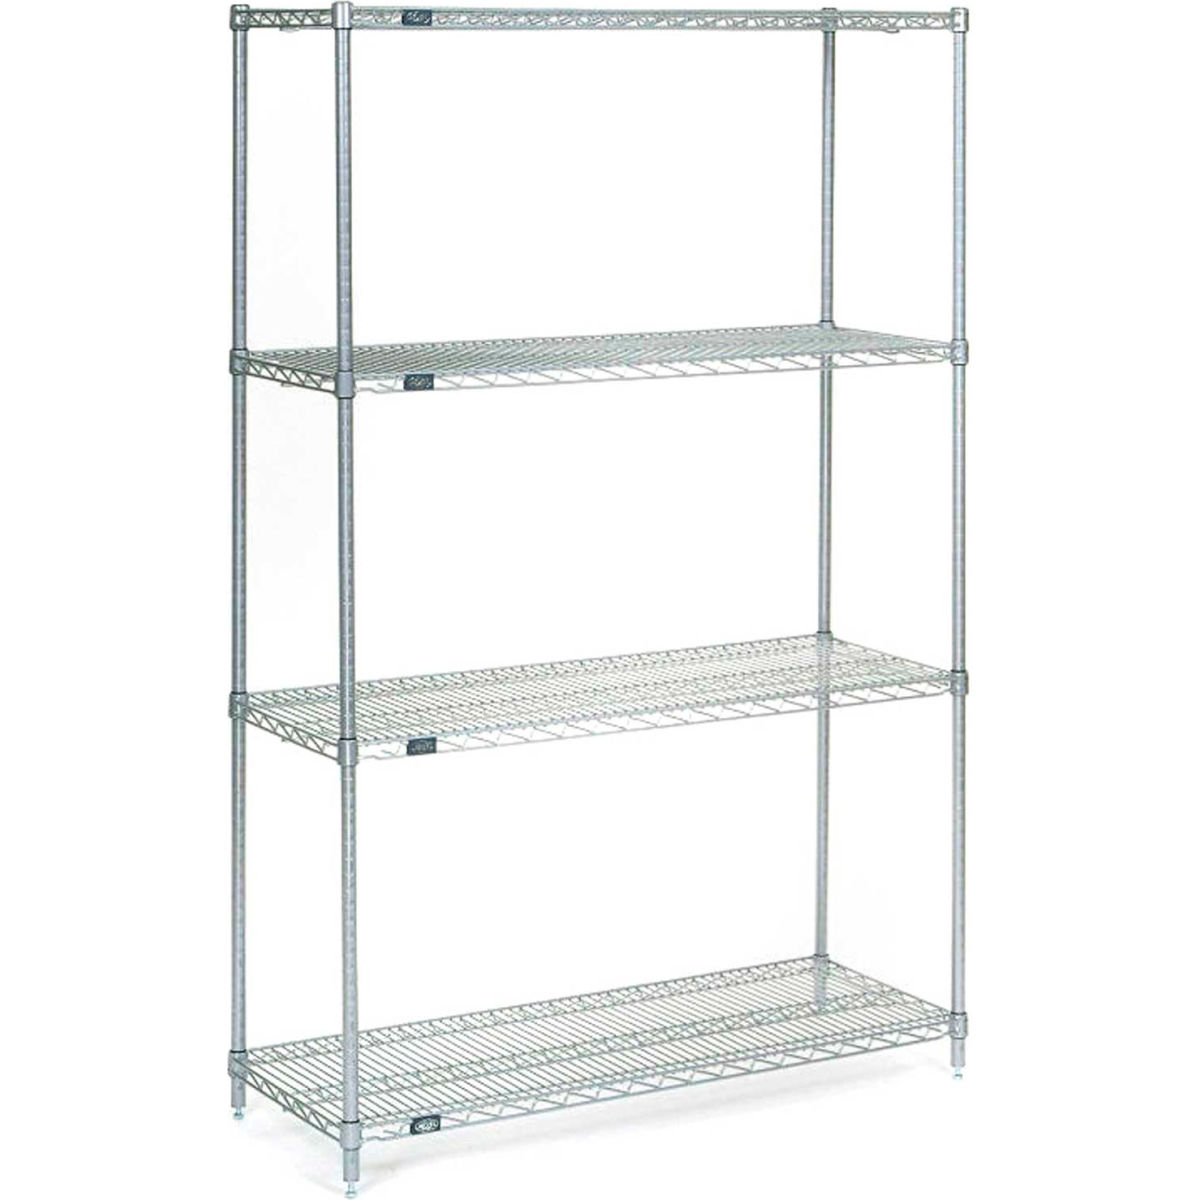 Picture of Global Industrial 14488S5 86 x 48 x 14 in. Nexel Stainless Steel Starter 5 Tier Wire Shelving